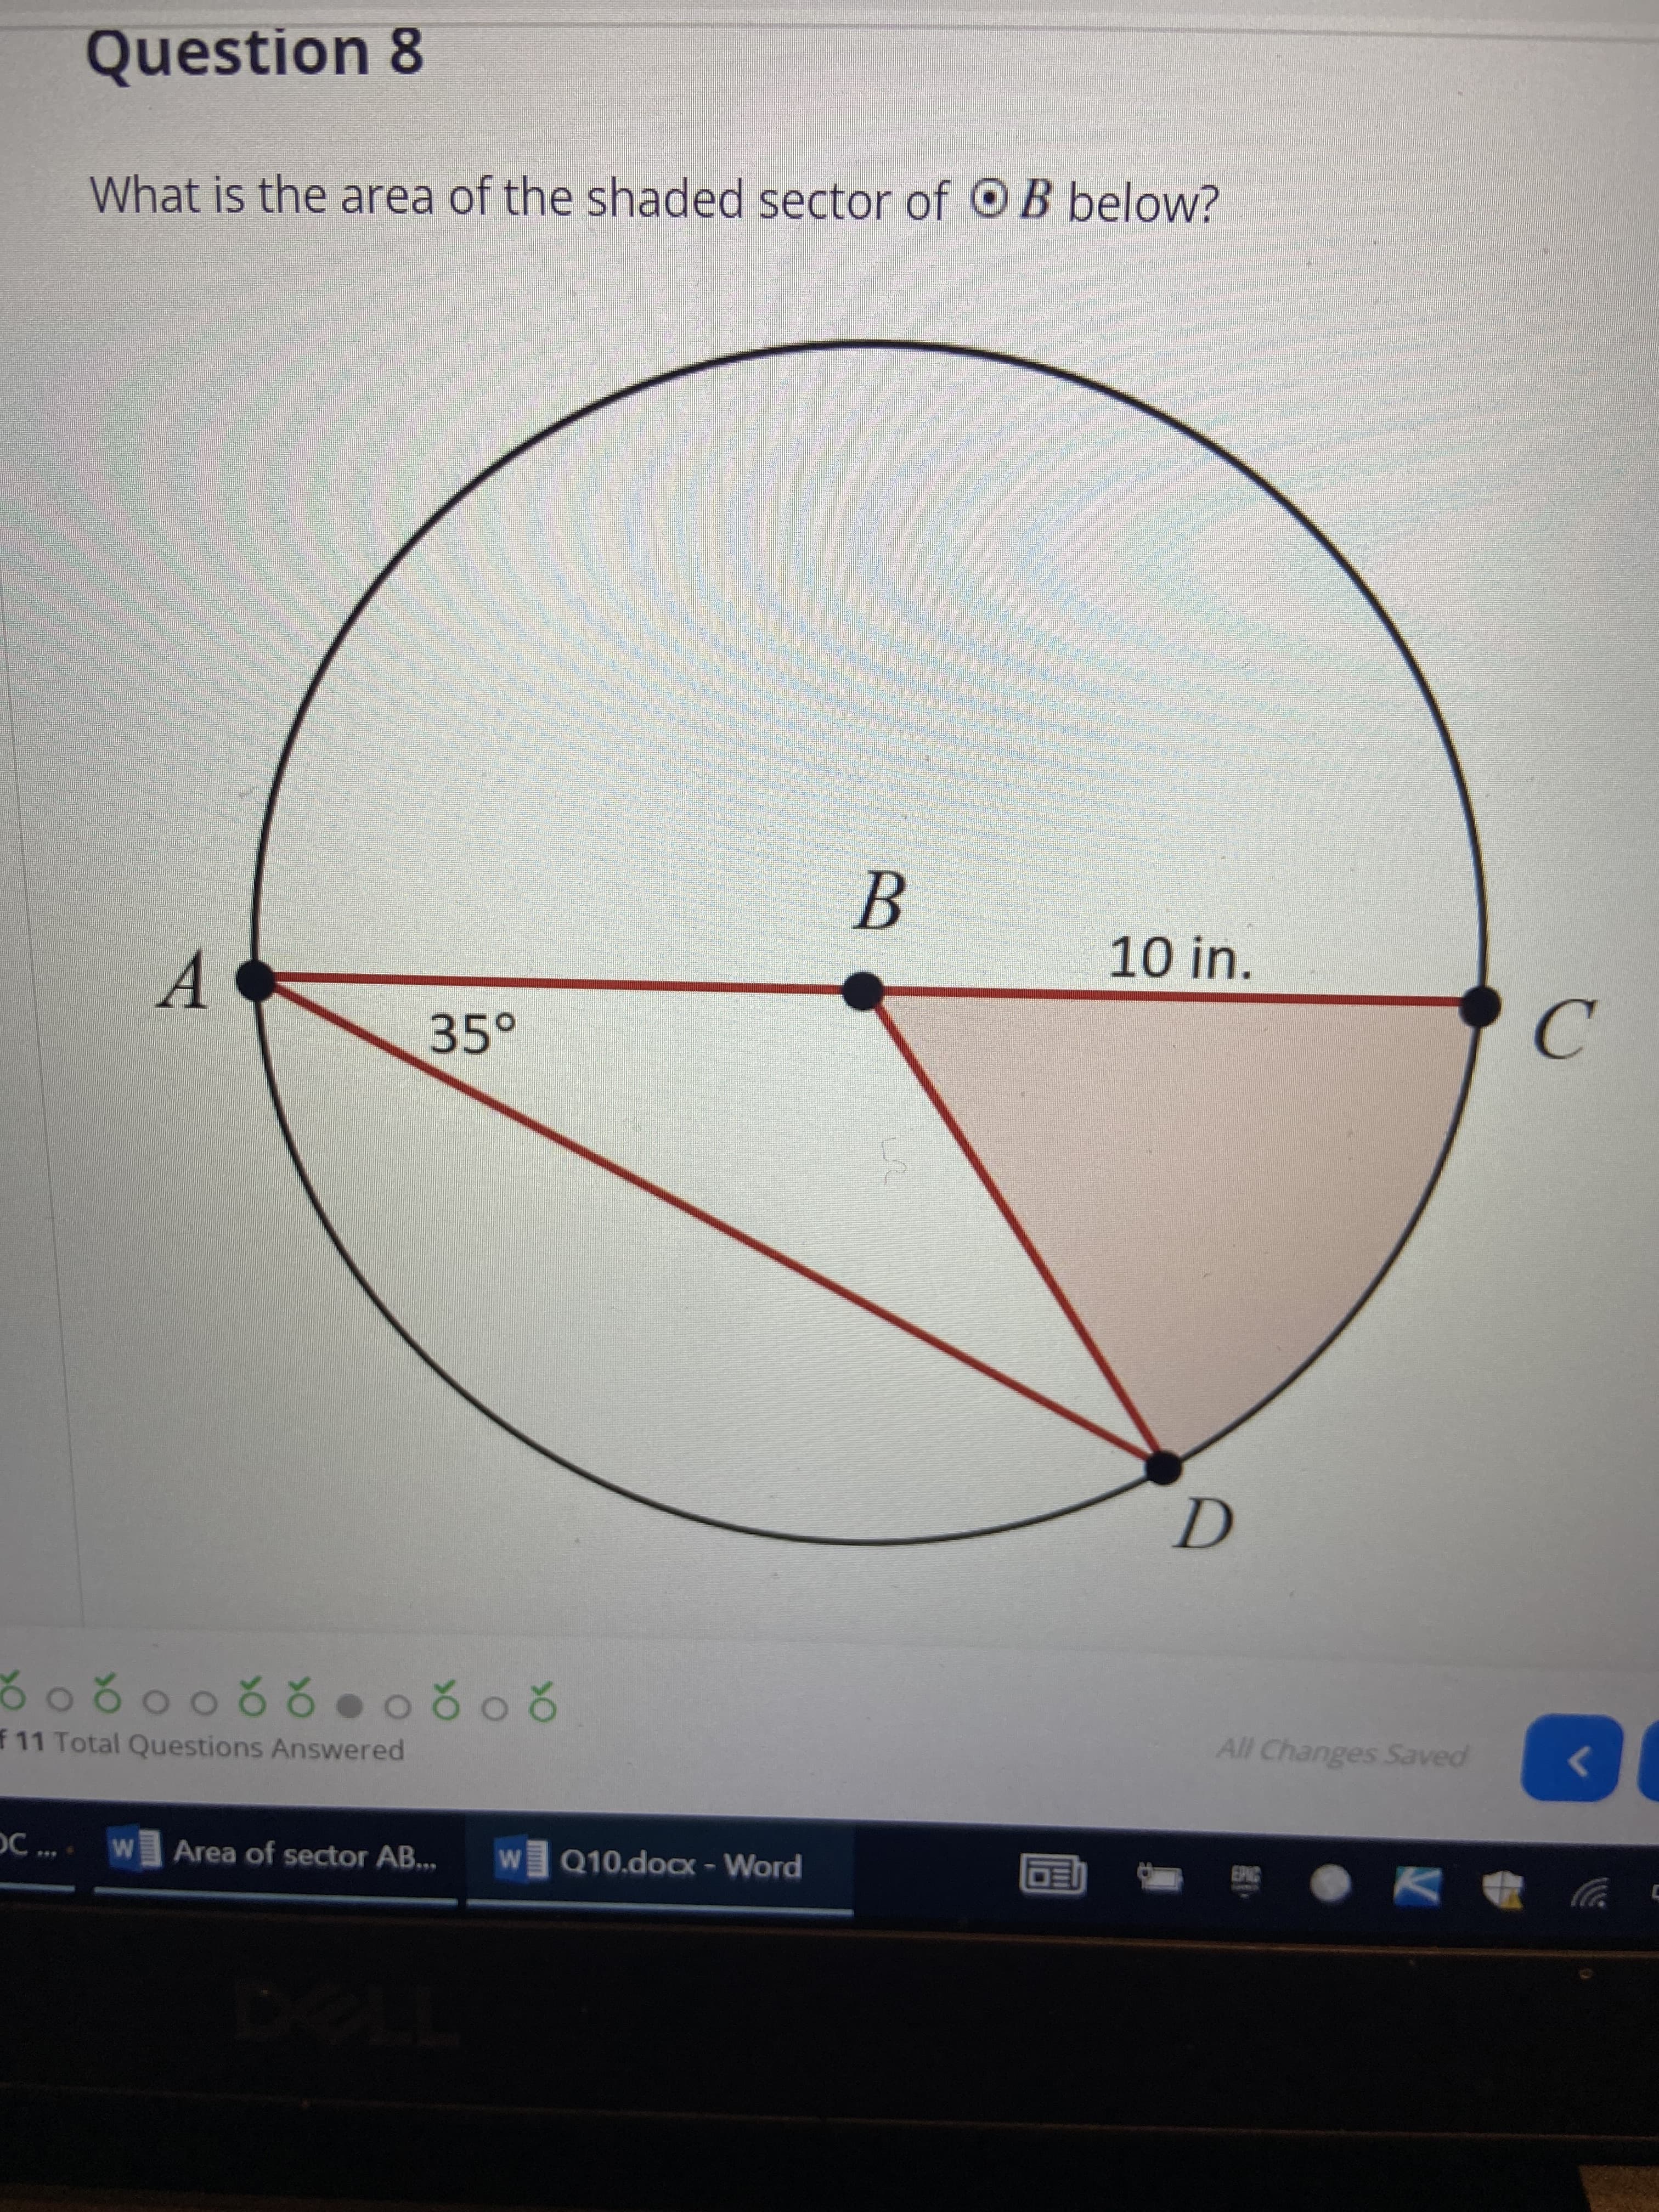 Question 8
What is the area of the shaded sector of OB below?
10in.
A.
C.
35-
208
f 11 Total Questions Answered
All Changes Saved
OC ...
W Area of sector AB...
W Q10.docx - Word
ש כ
